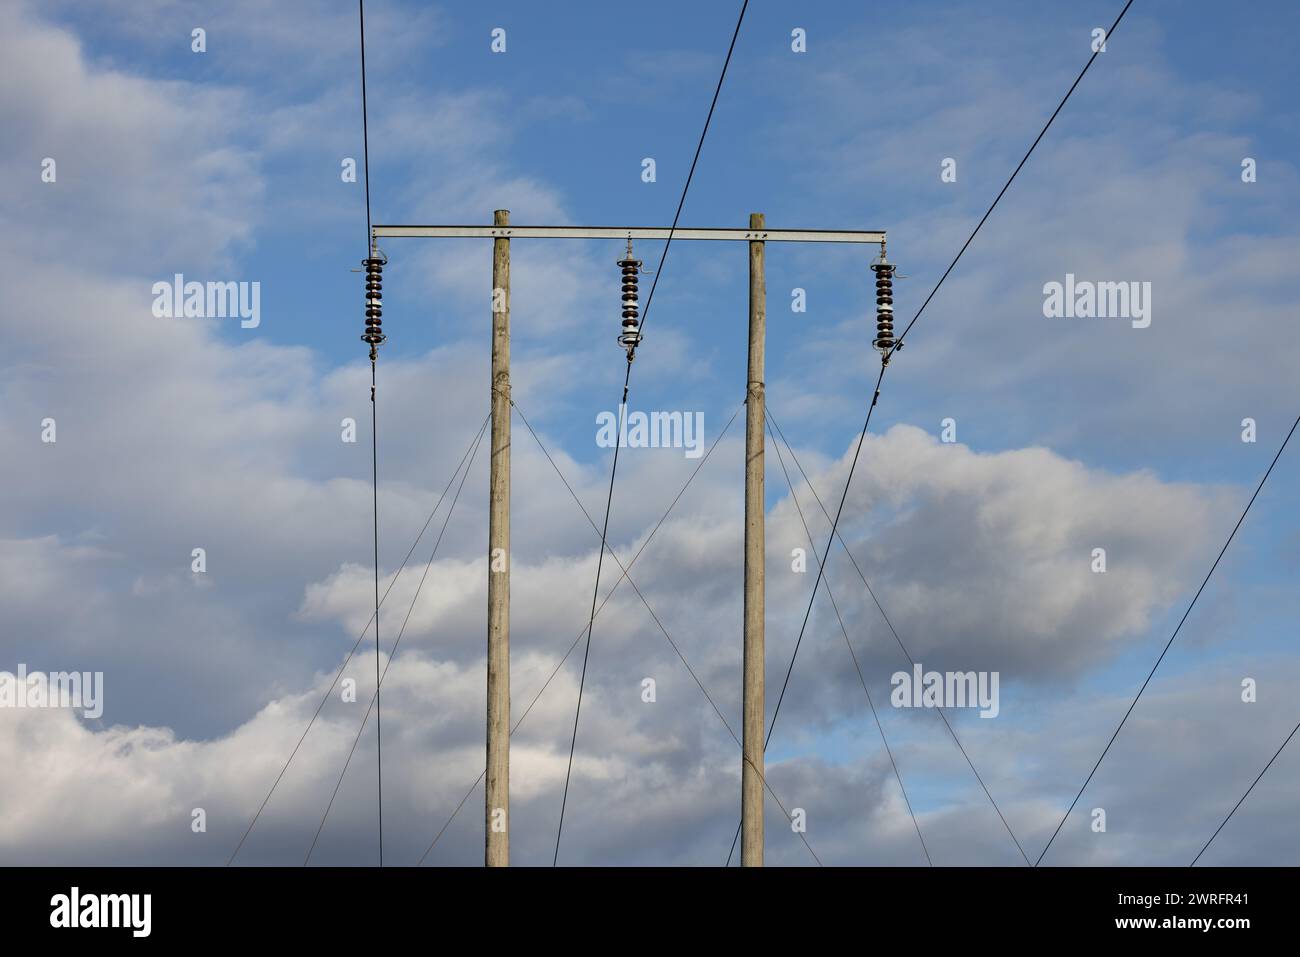 Electrical wooden pylon, cables and isolators against sky with mixed clouds Stock Photo